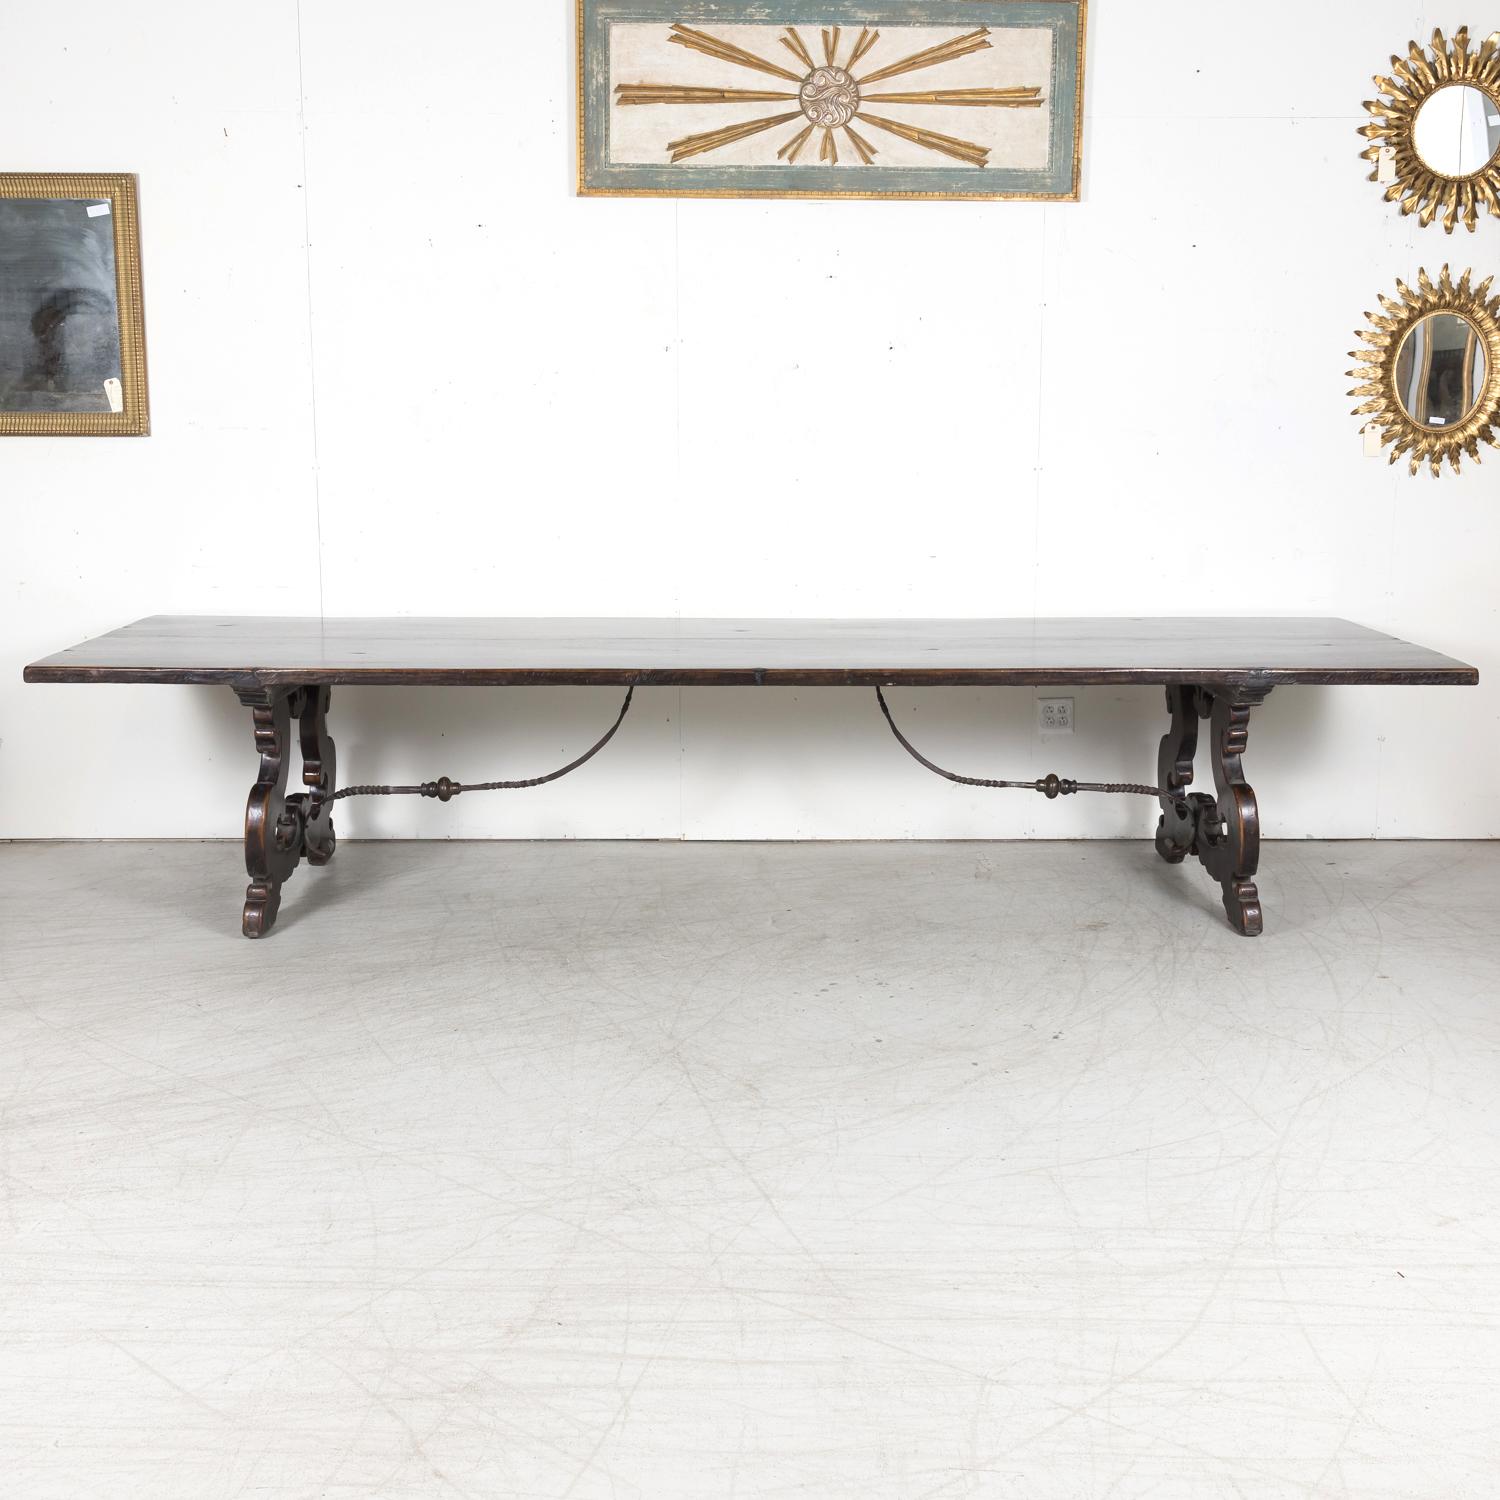 An impressive late 19th century Spanish Baroque style trestle dining table handcrafted of solid walnut near Barcelona, circa 1890s. Having a thick two-board top with a wonderful rich color and deep lustrous patination, this antique Spanish dining